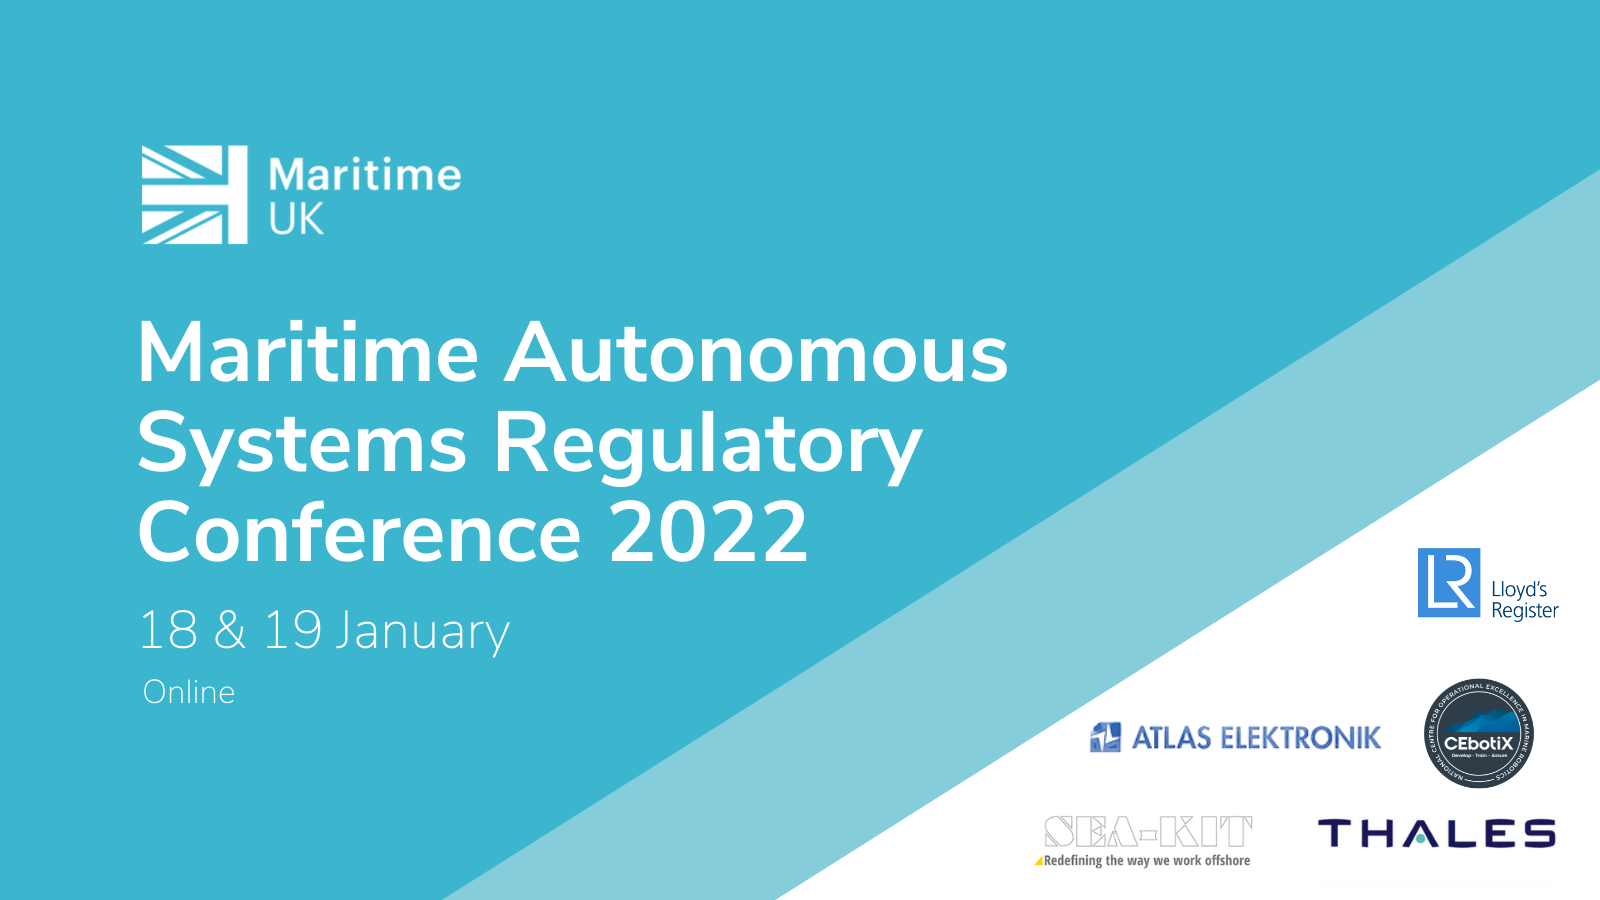 The Maritime Autonomous Systems Regulatory Working Group Conference 2022